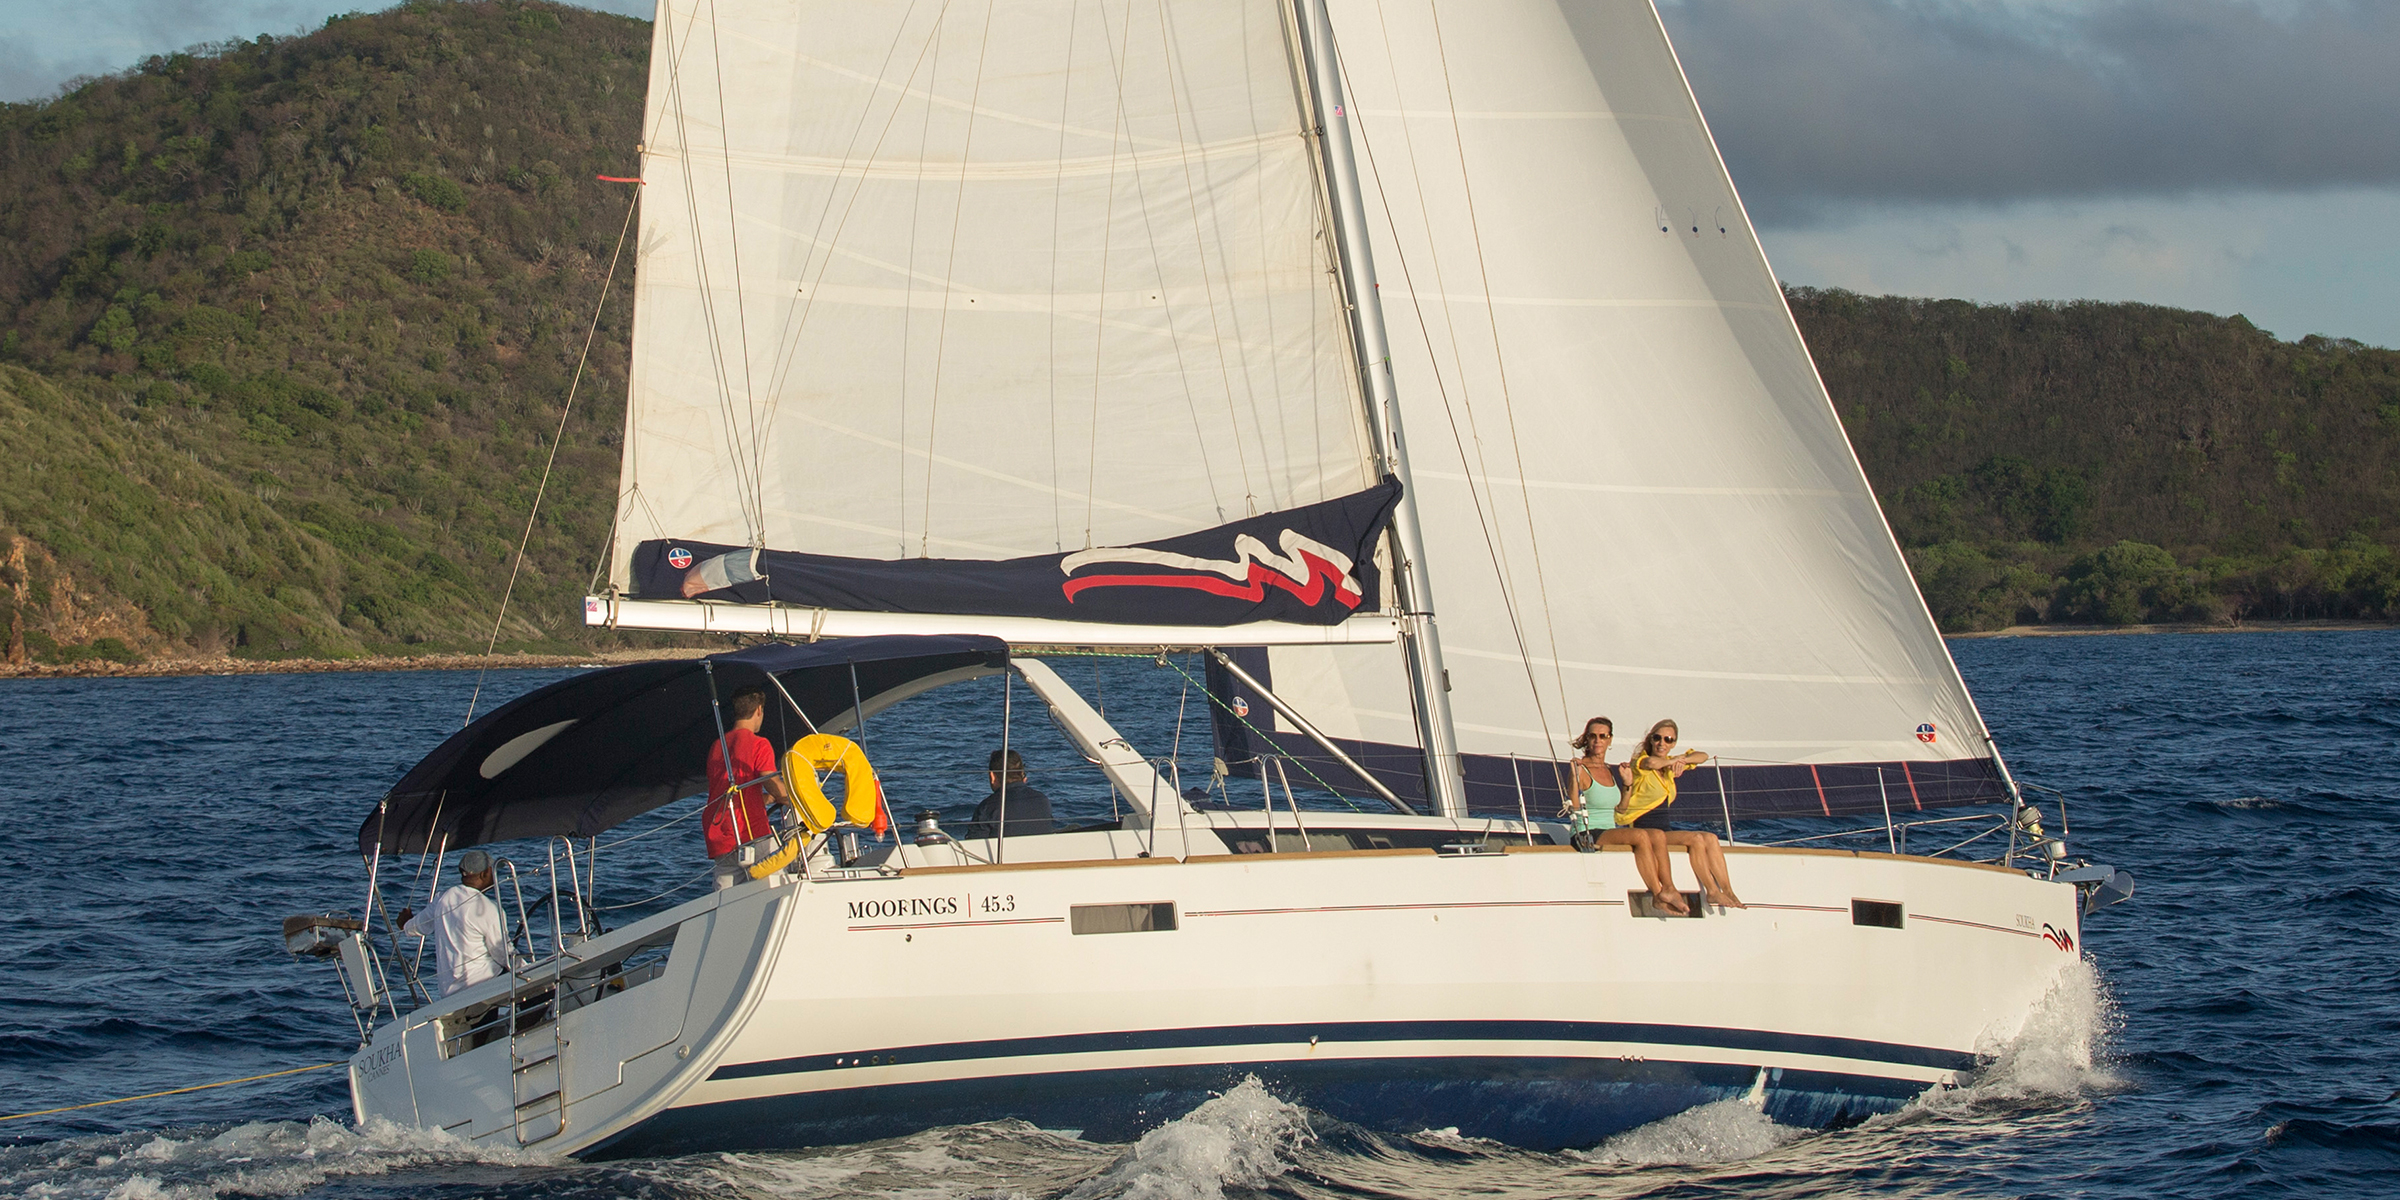 Oceanis 45 - Yacht Charter Rodney Bay & Boat hire in St. Lucia Gros Islet Rodney Bay Marina 5